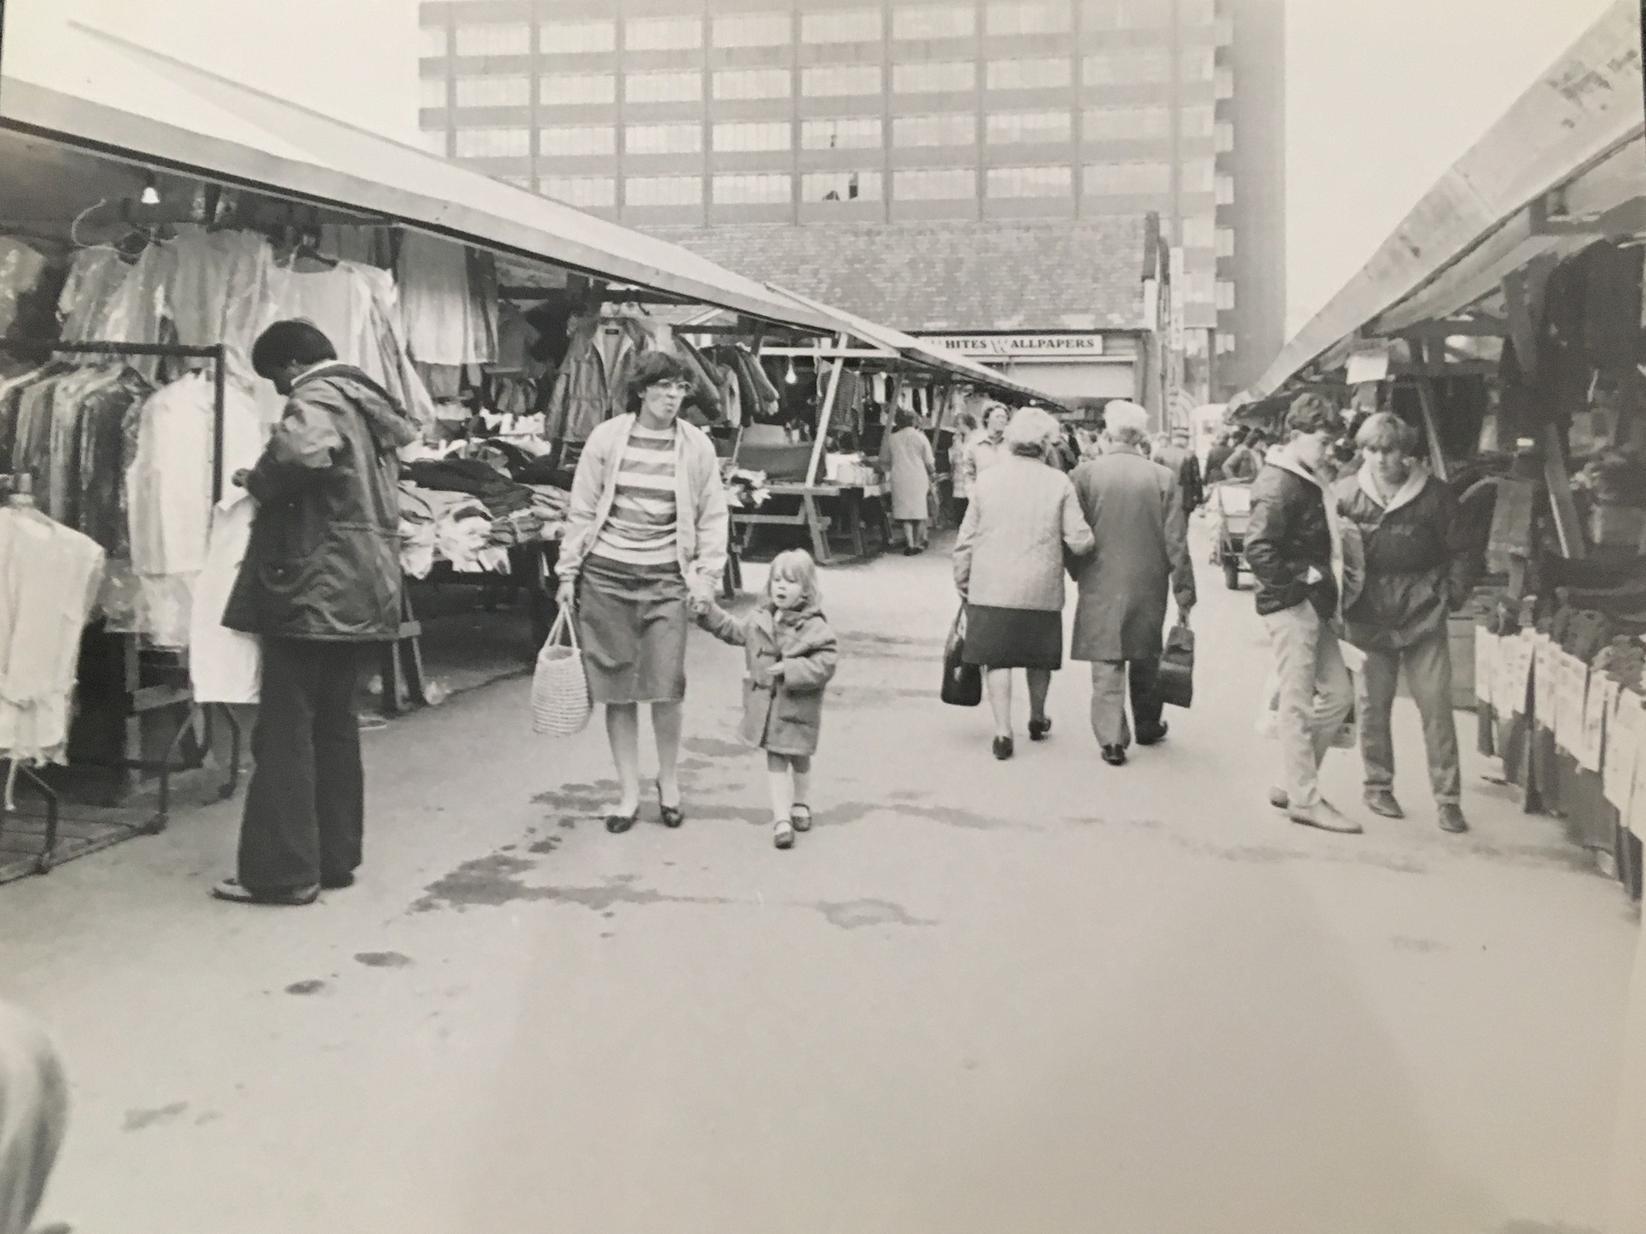 Do you have any fond memories of the outdoor market?